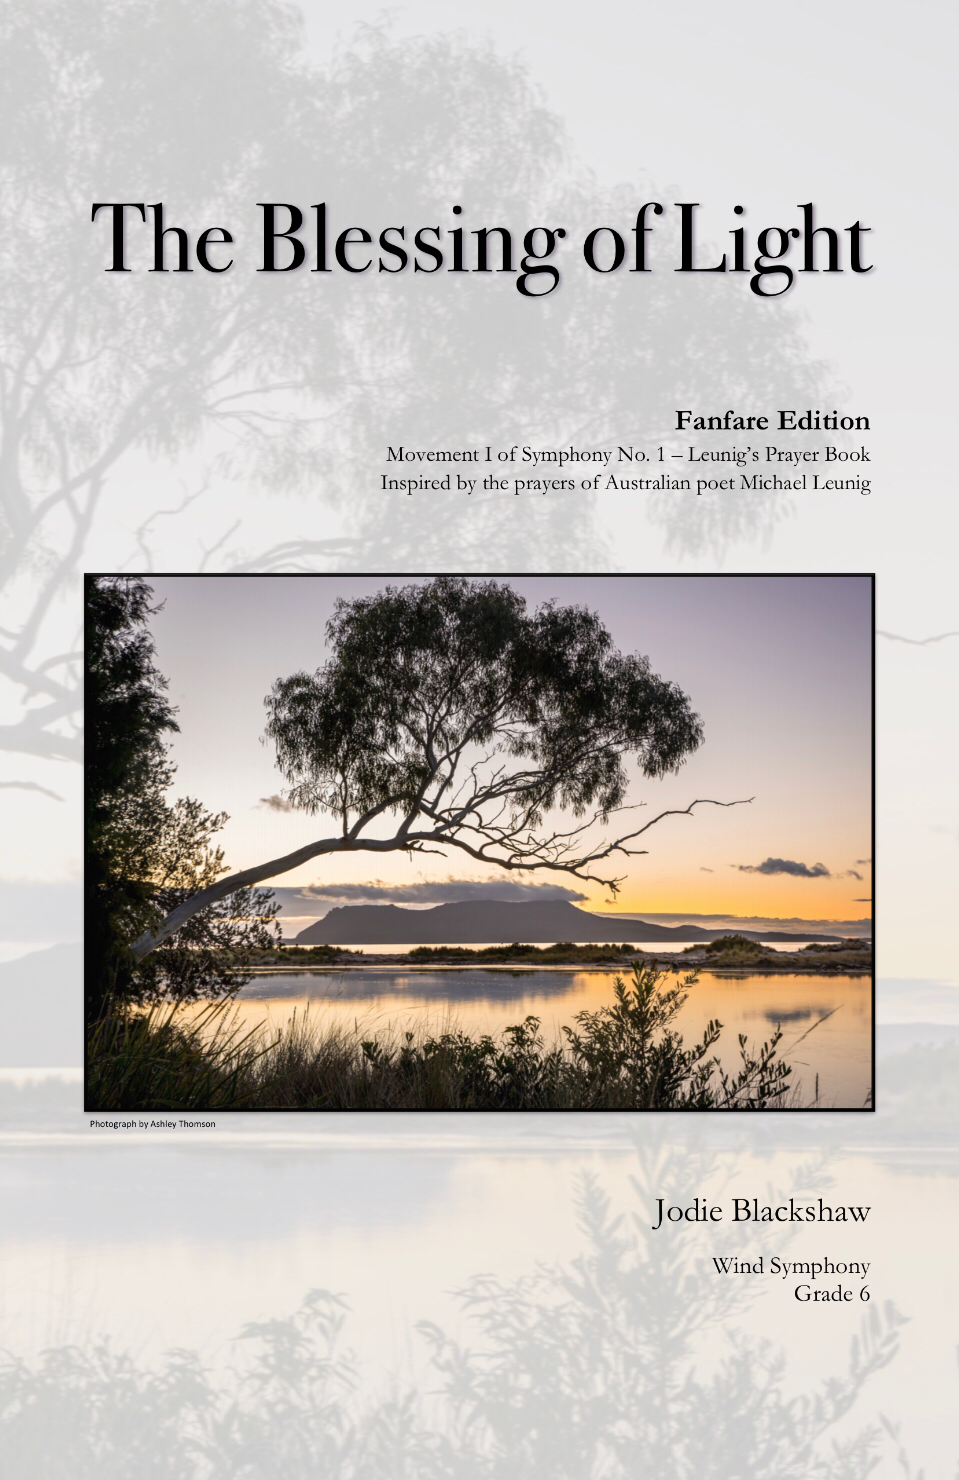 The Blessing Of Light by Jodie Blackshaw